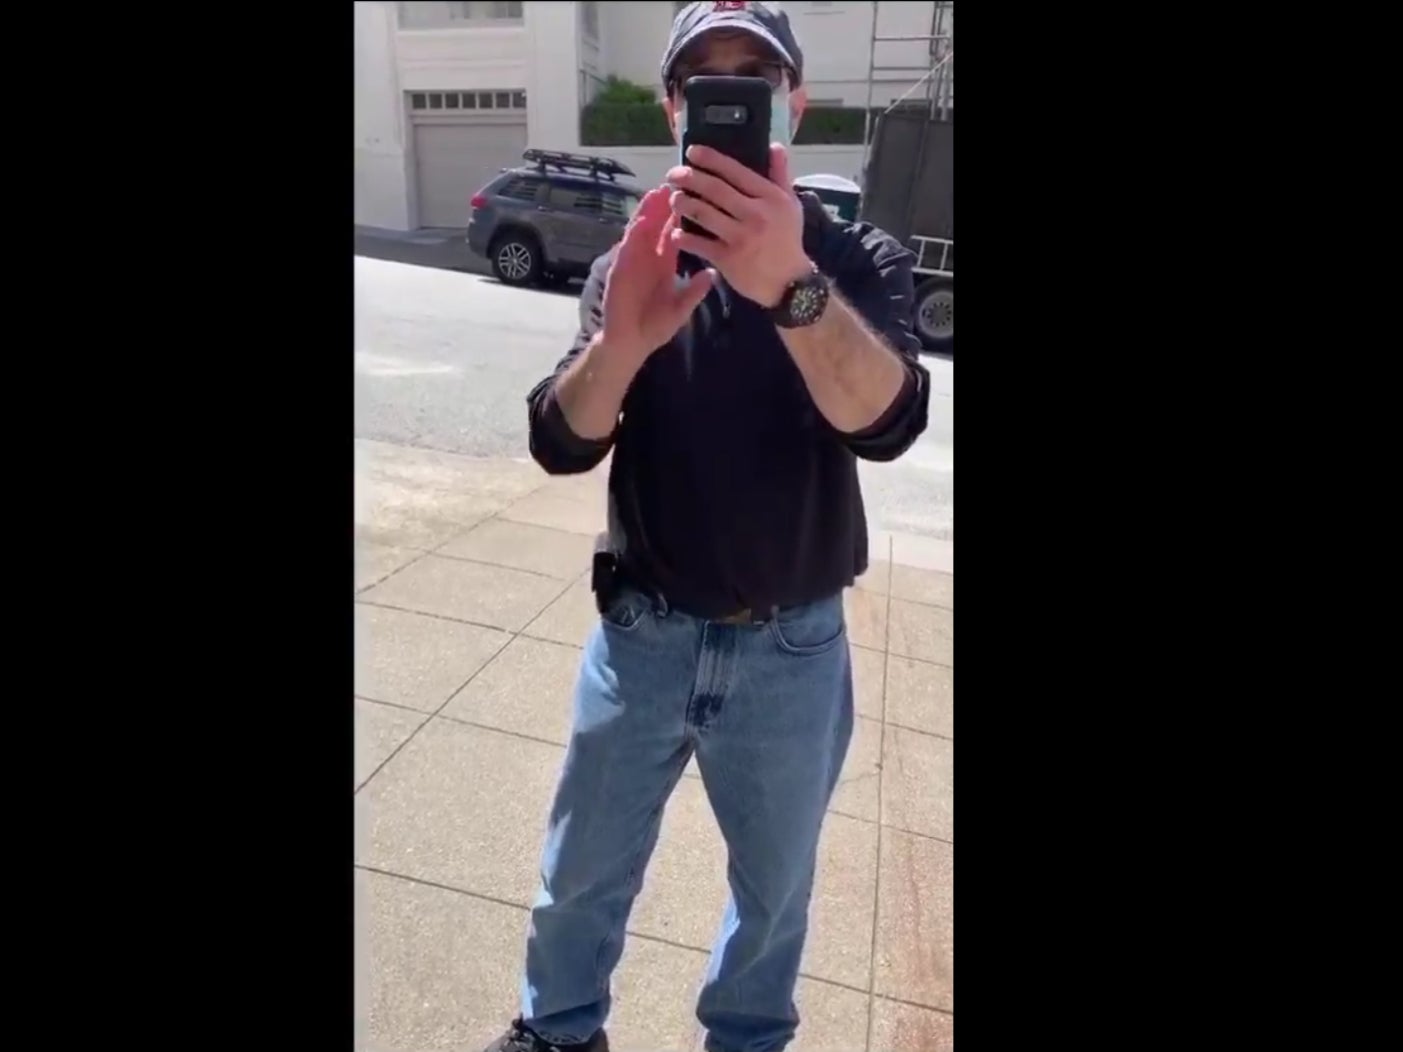 Video showing a delivery driver being quizzed by a white man in San Francisco